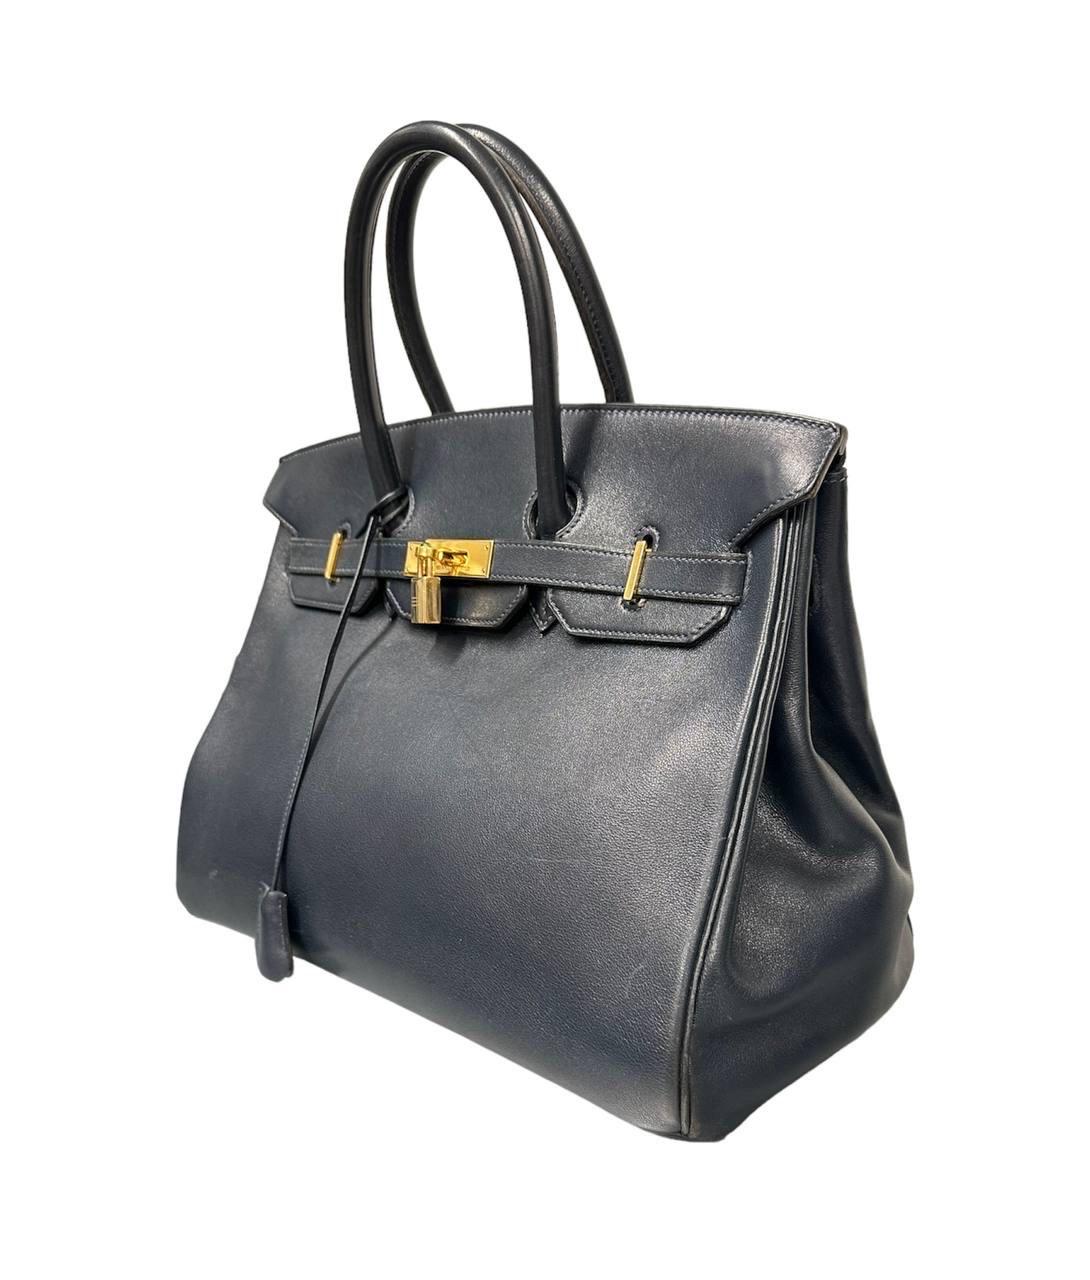 Bag by Hermès, Birkin model, size 35, made in Obscur color Courchevel leather, with gold hardware. Equipped with a flap with a classic padlock closure. Internally lined in leather, very roomy. Equipped with a double rigid leather handle and a